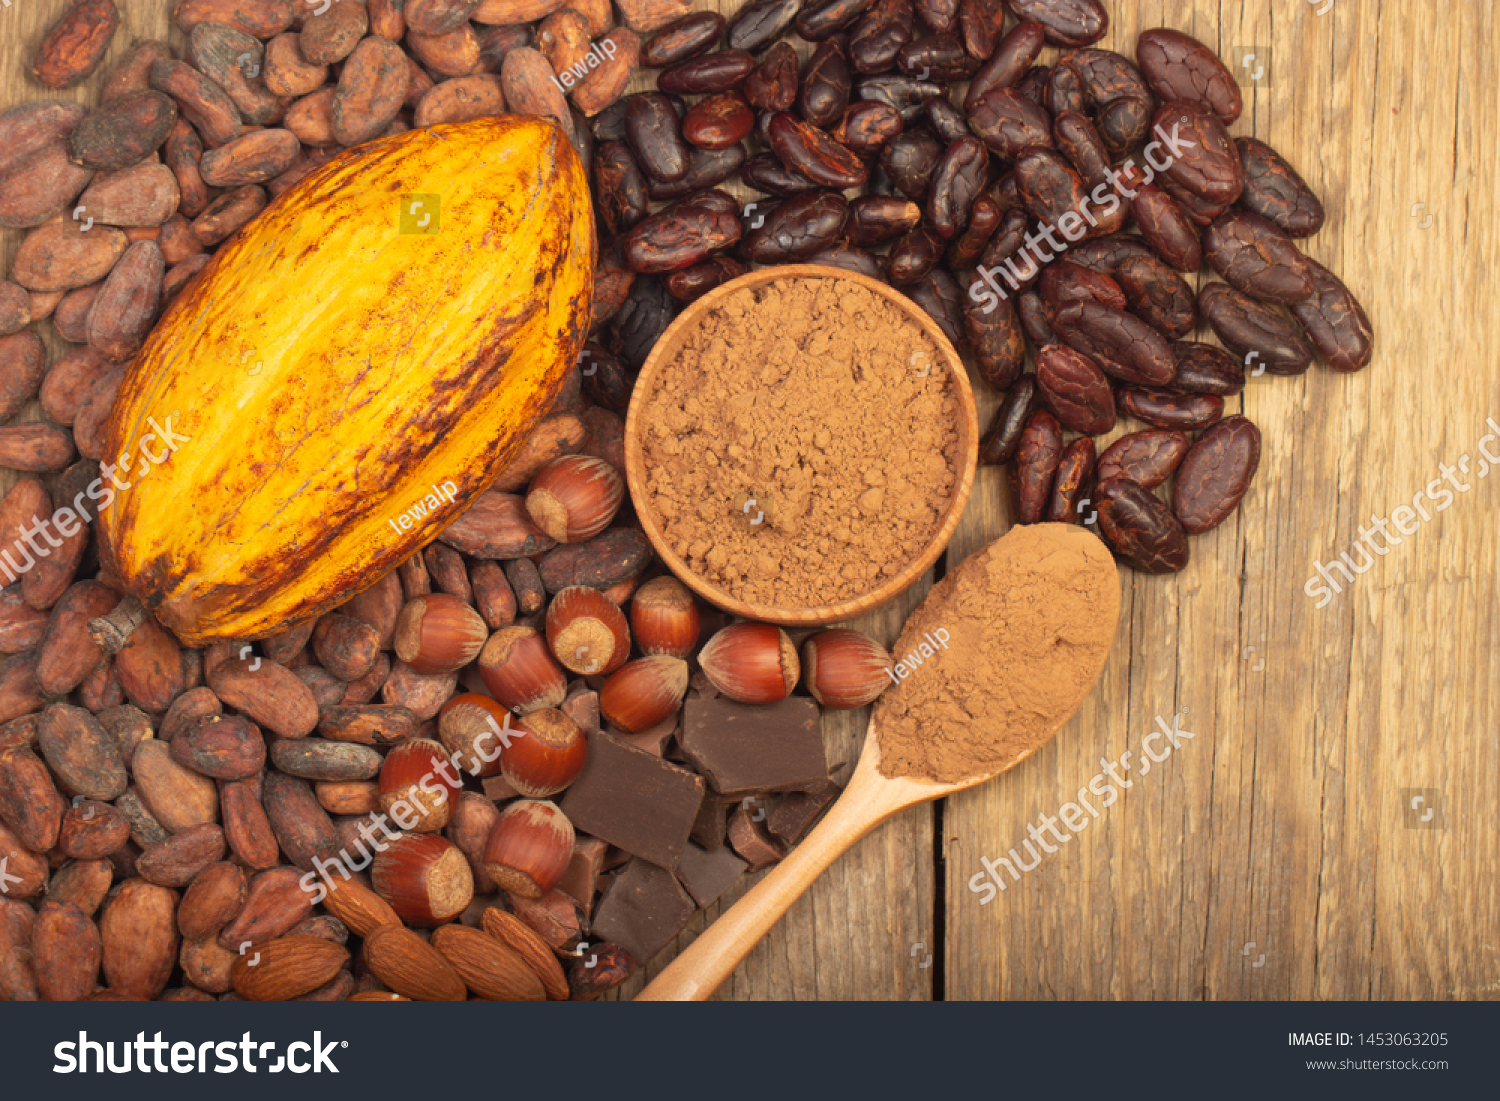 cacao pods, carob pods and dried fruits on wooden background #1453063205